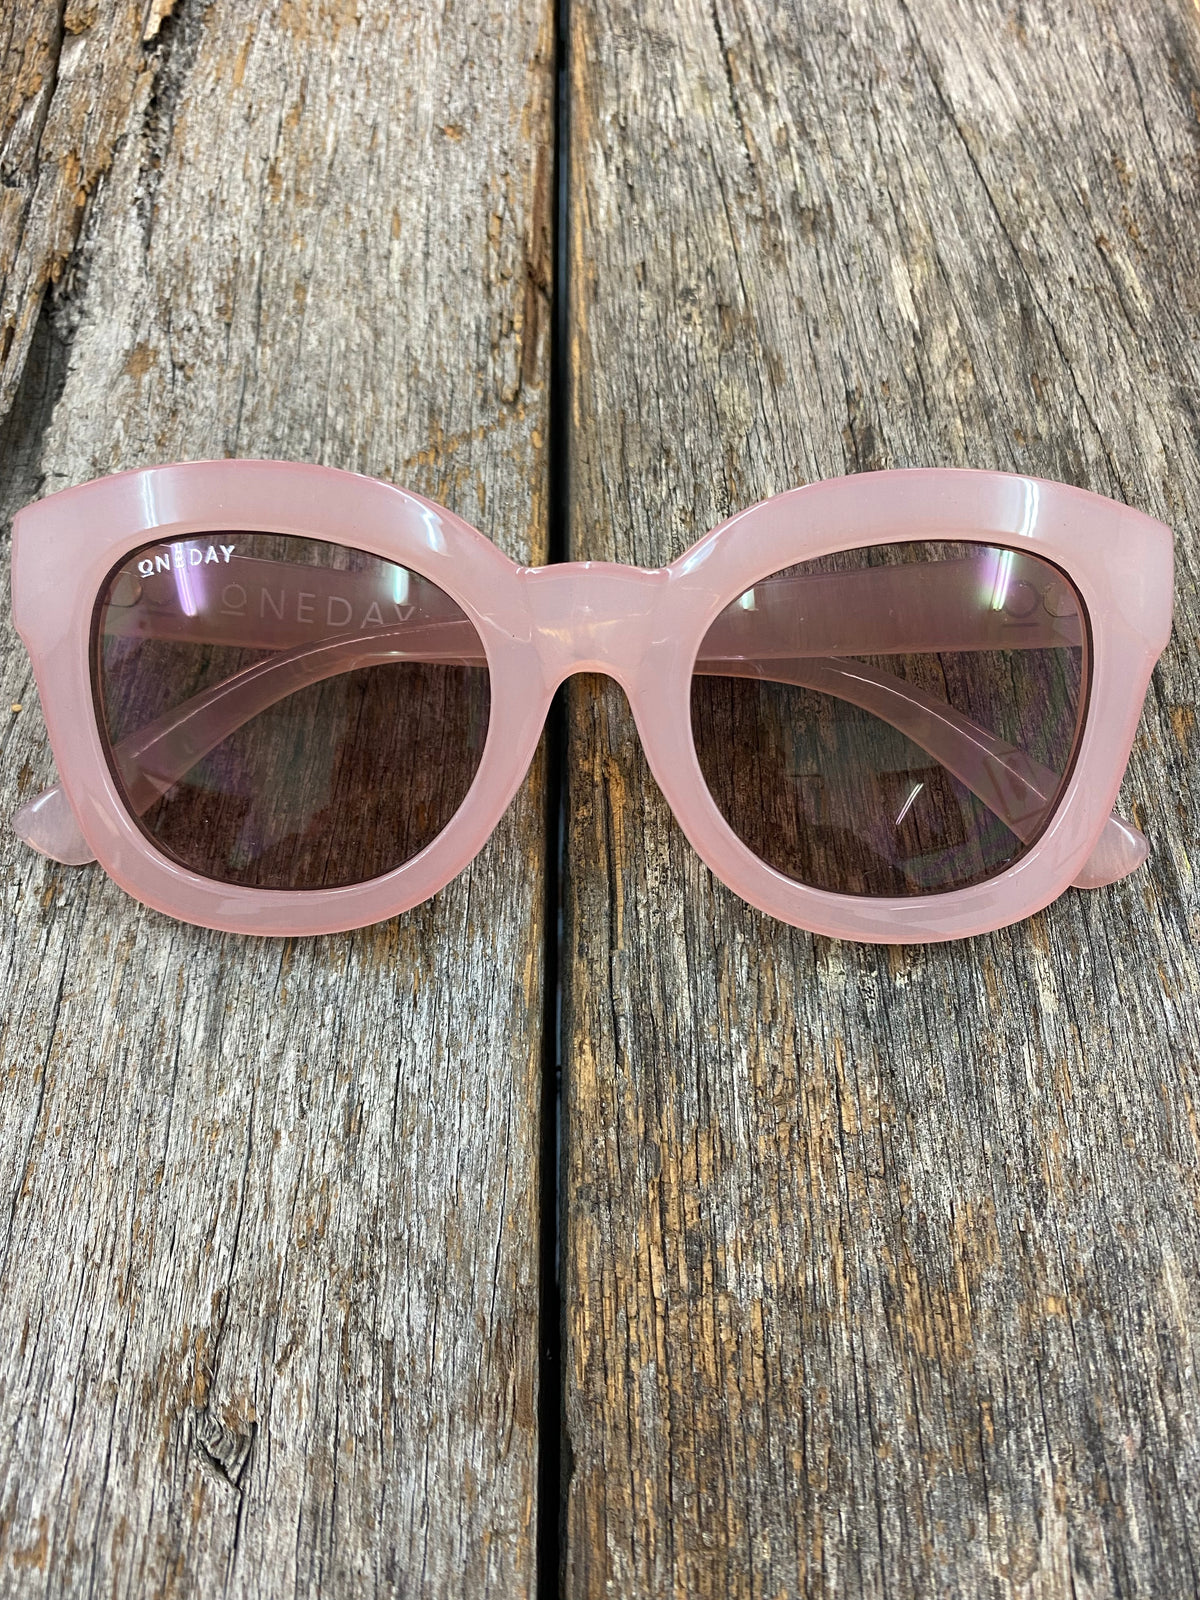 XOXO Sunglasses - Pink and Rose